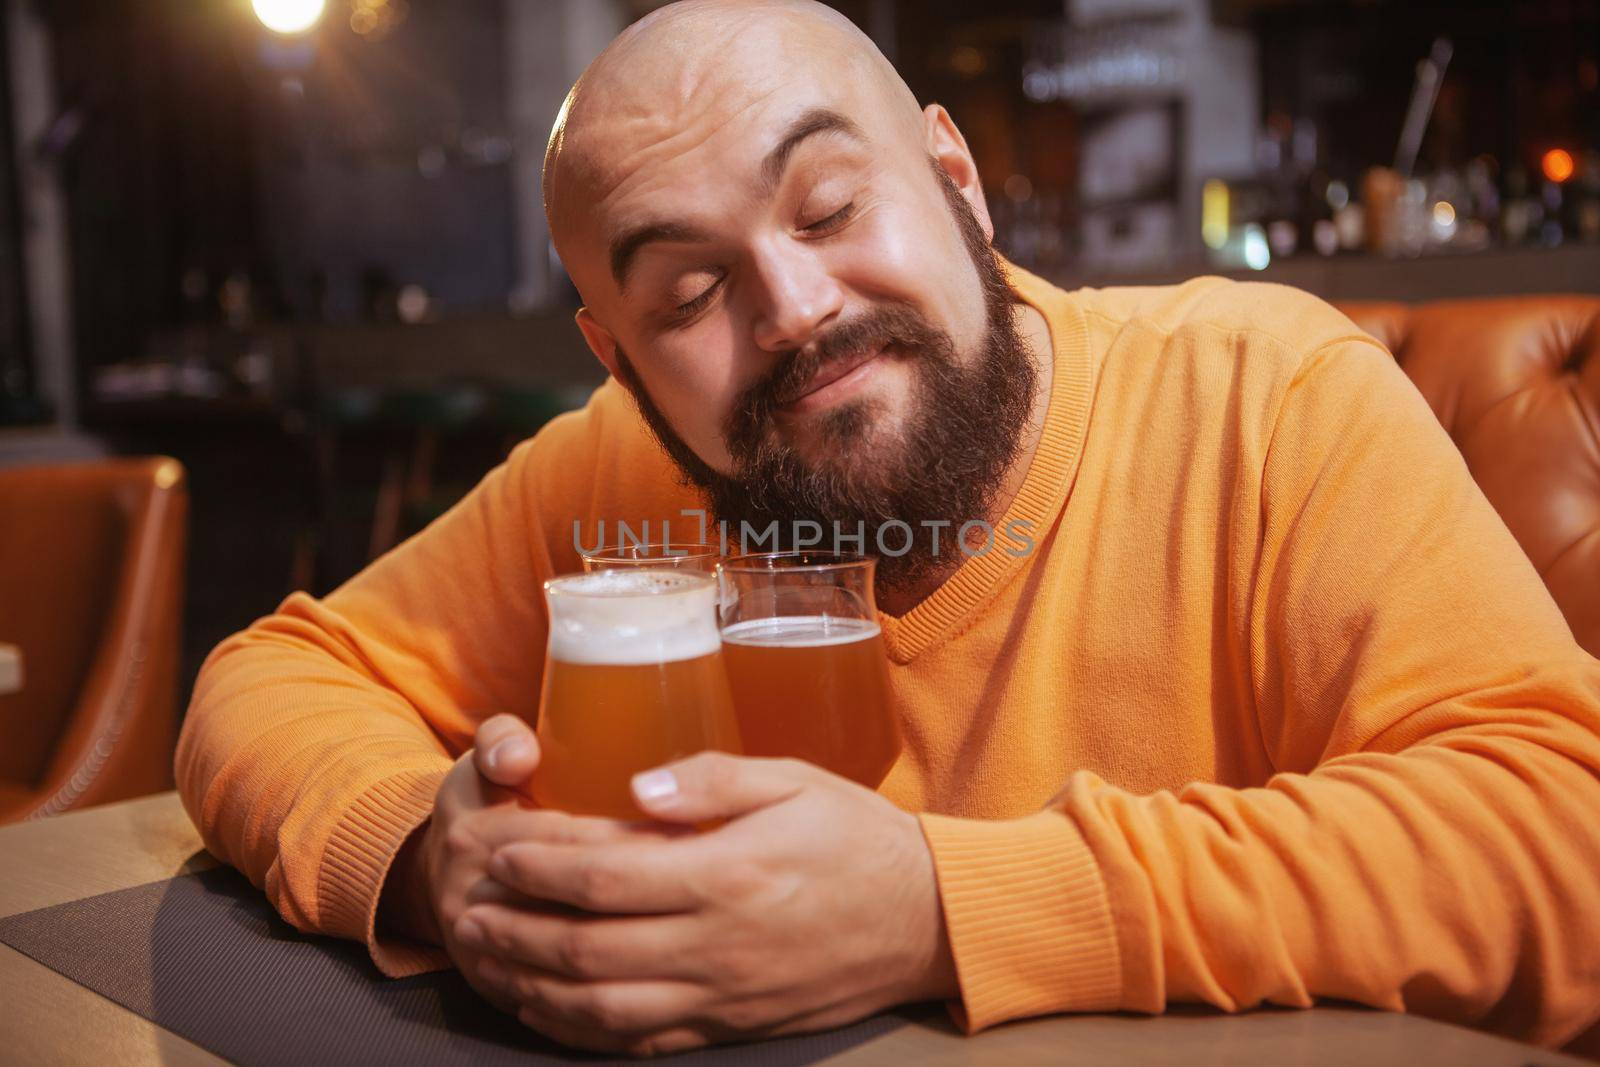 Charming young man smiling with his eyec closed embracing beer mugs. Happy man hugging beer glasses